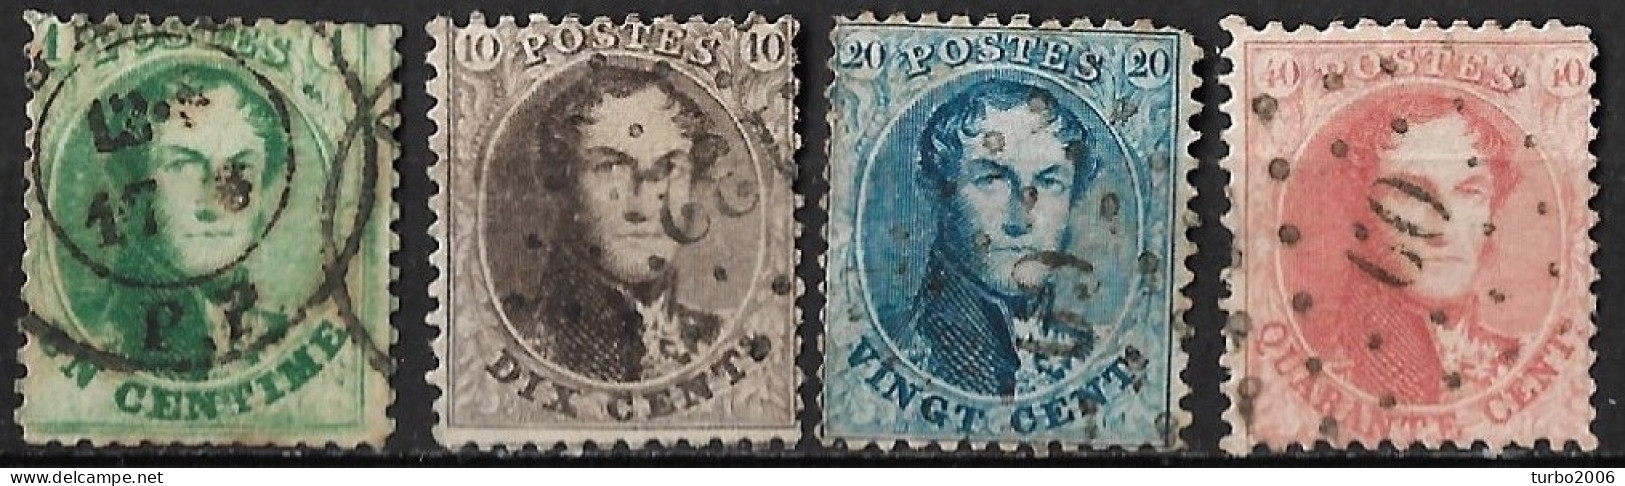 Belgium 1863 Leopold I Médaillons Perforated Complete Used Set Michel 10 A - 11 A - 12 B - 13 B - 1863-1864 Médaillons (13/16)